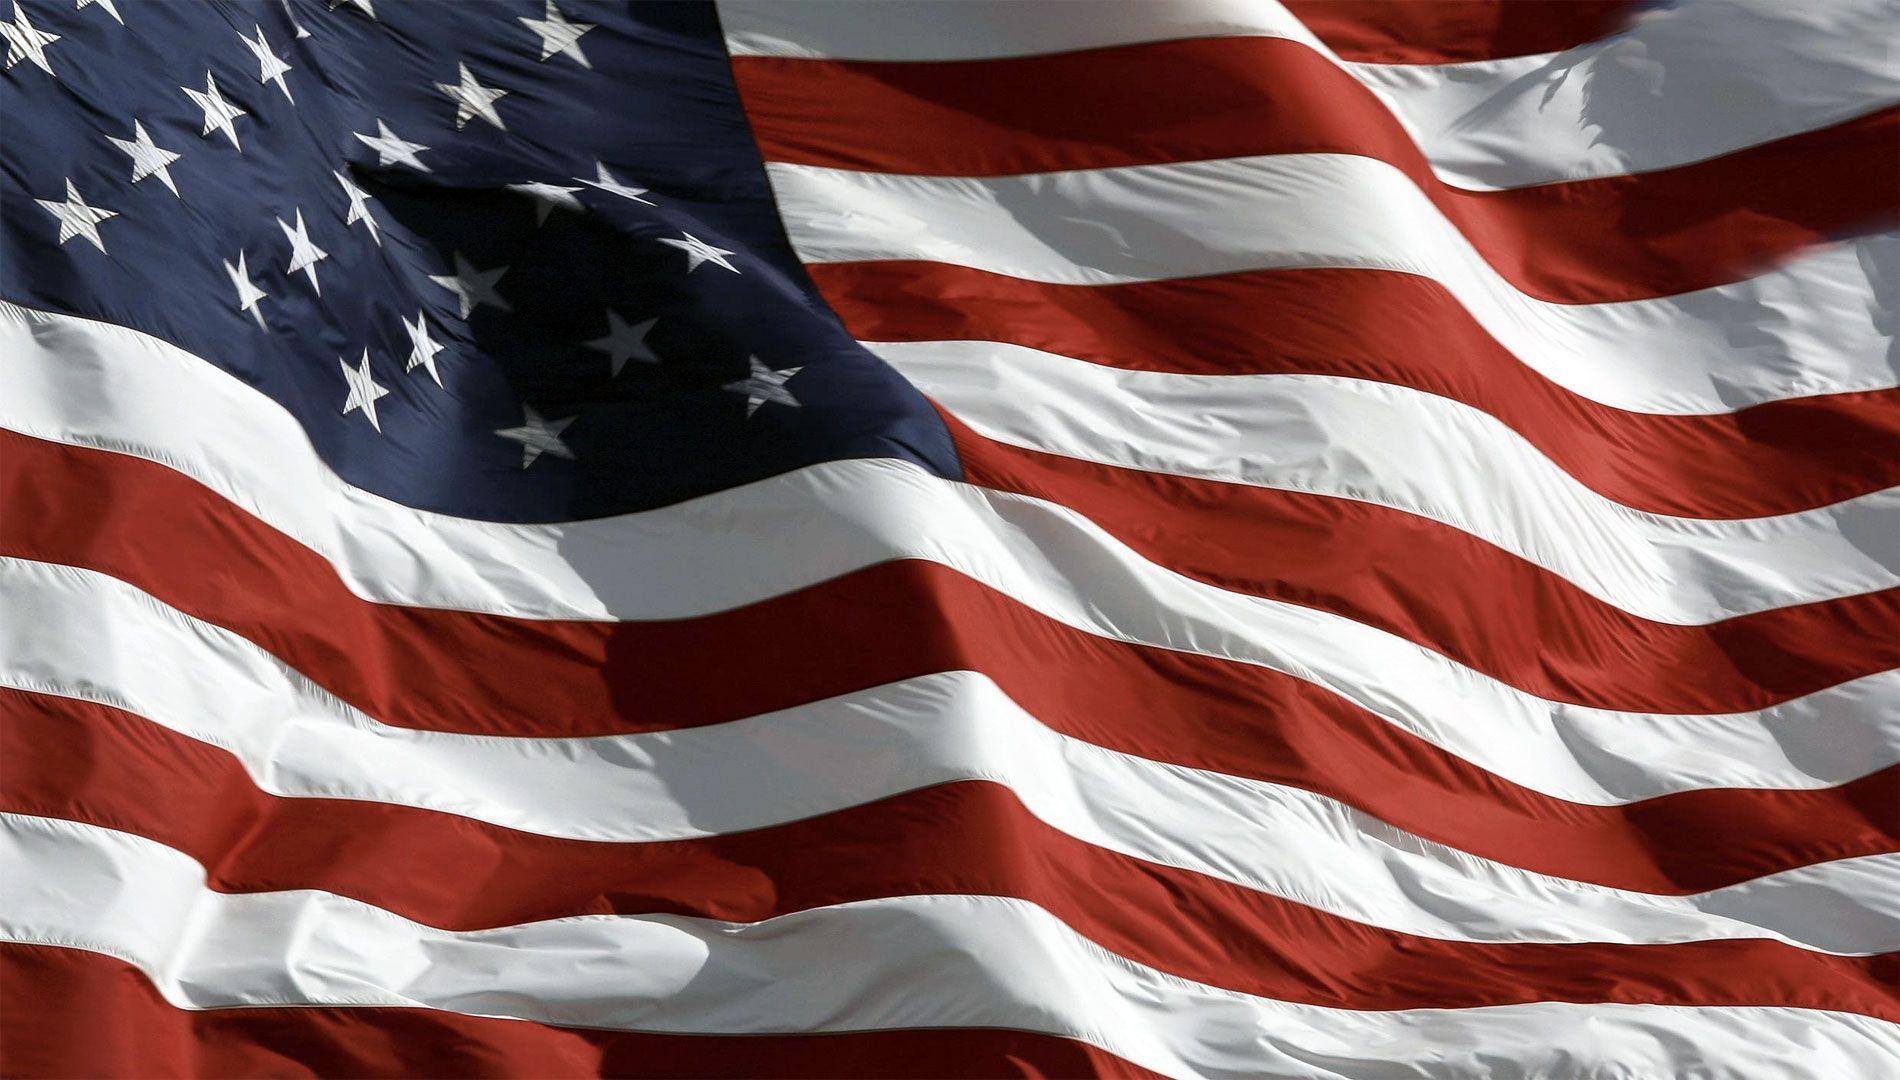 American Flag HD Image and Wallpaper Free Download